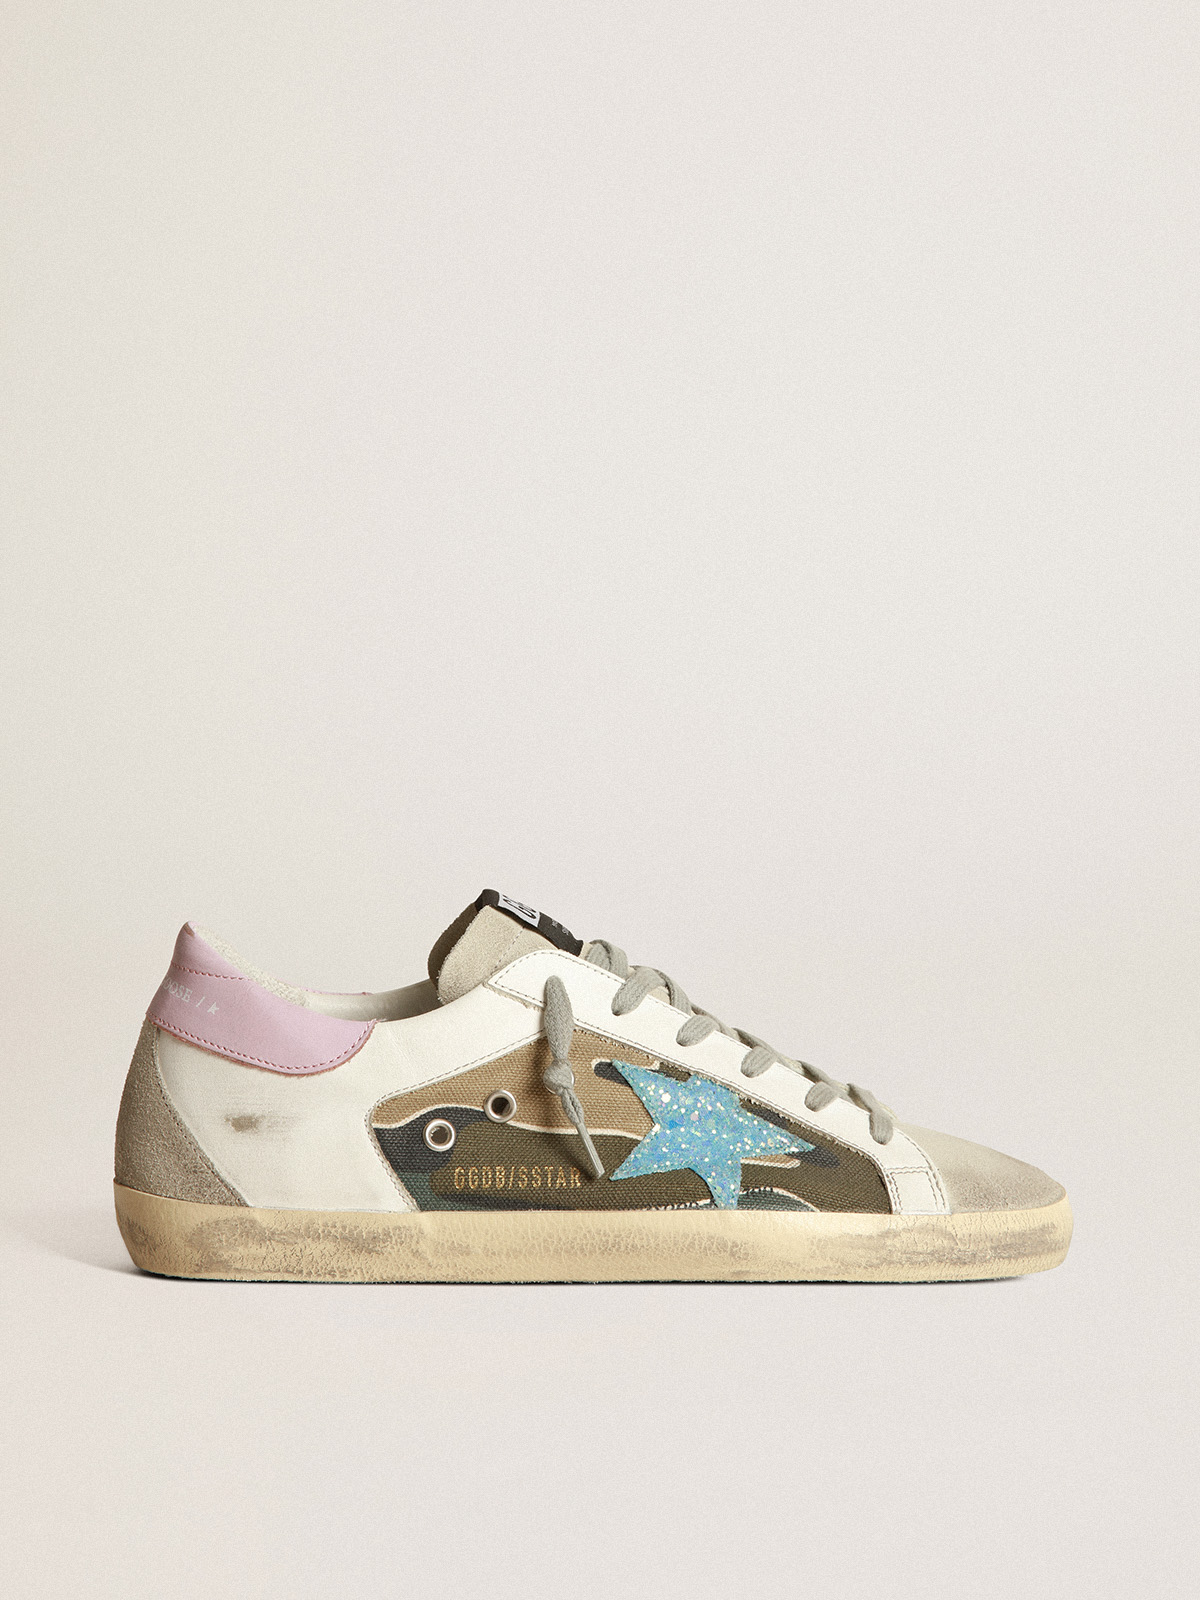 Camouflage Super-Star sneakers with glittery star and pink heel tab |  Golden Goose